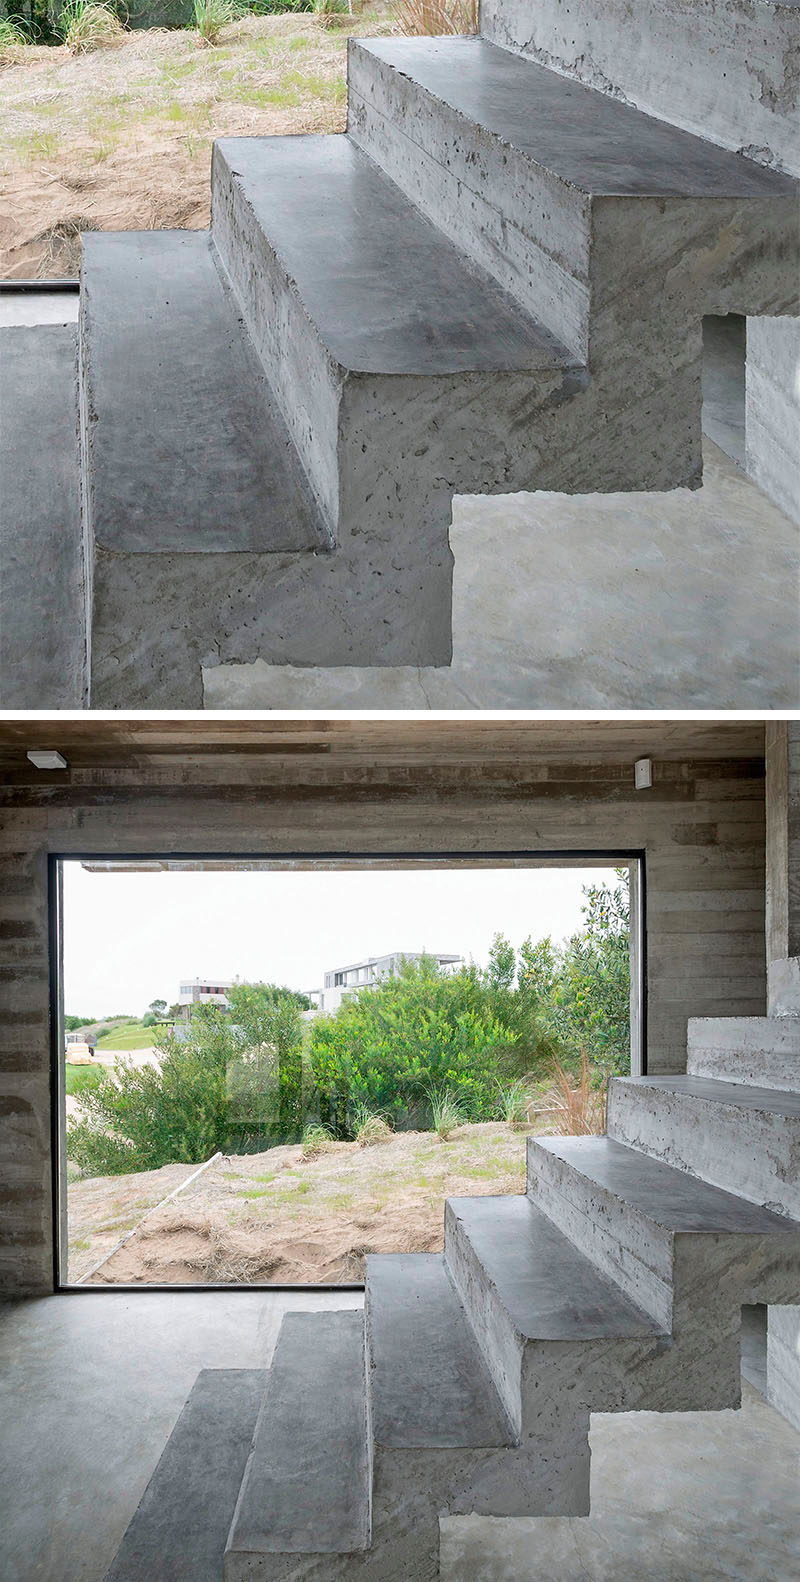 18 Examples Of Stair Details To Inspire You // These stairs are made entirely out of formed concrete.